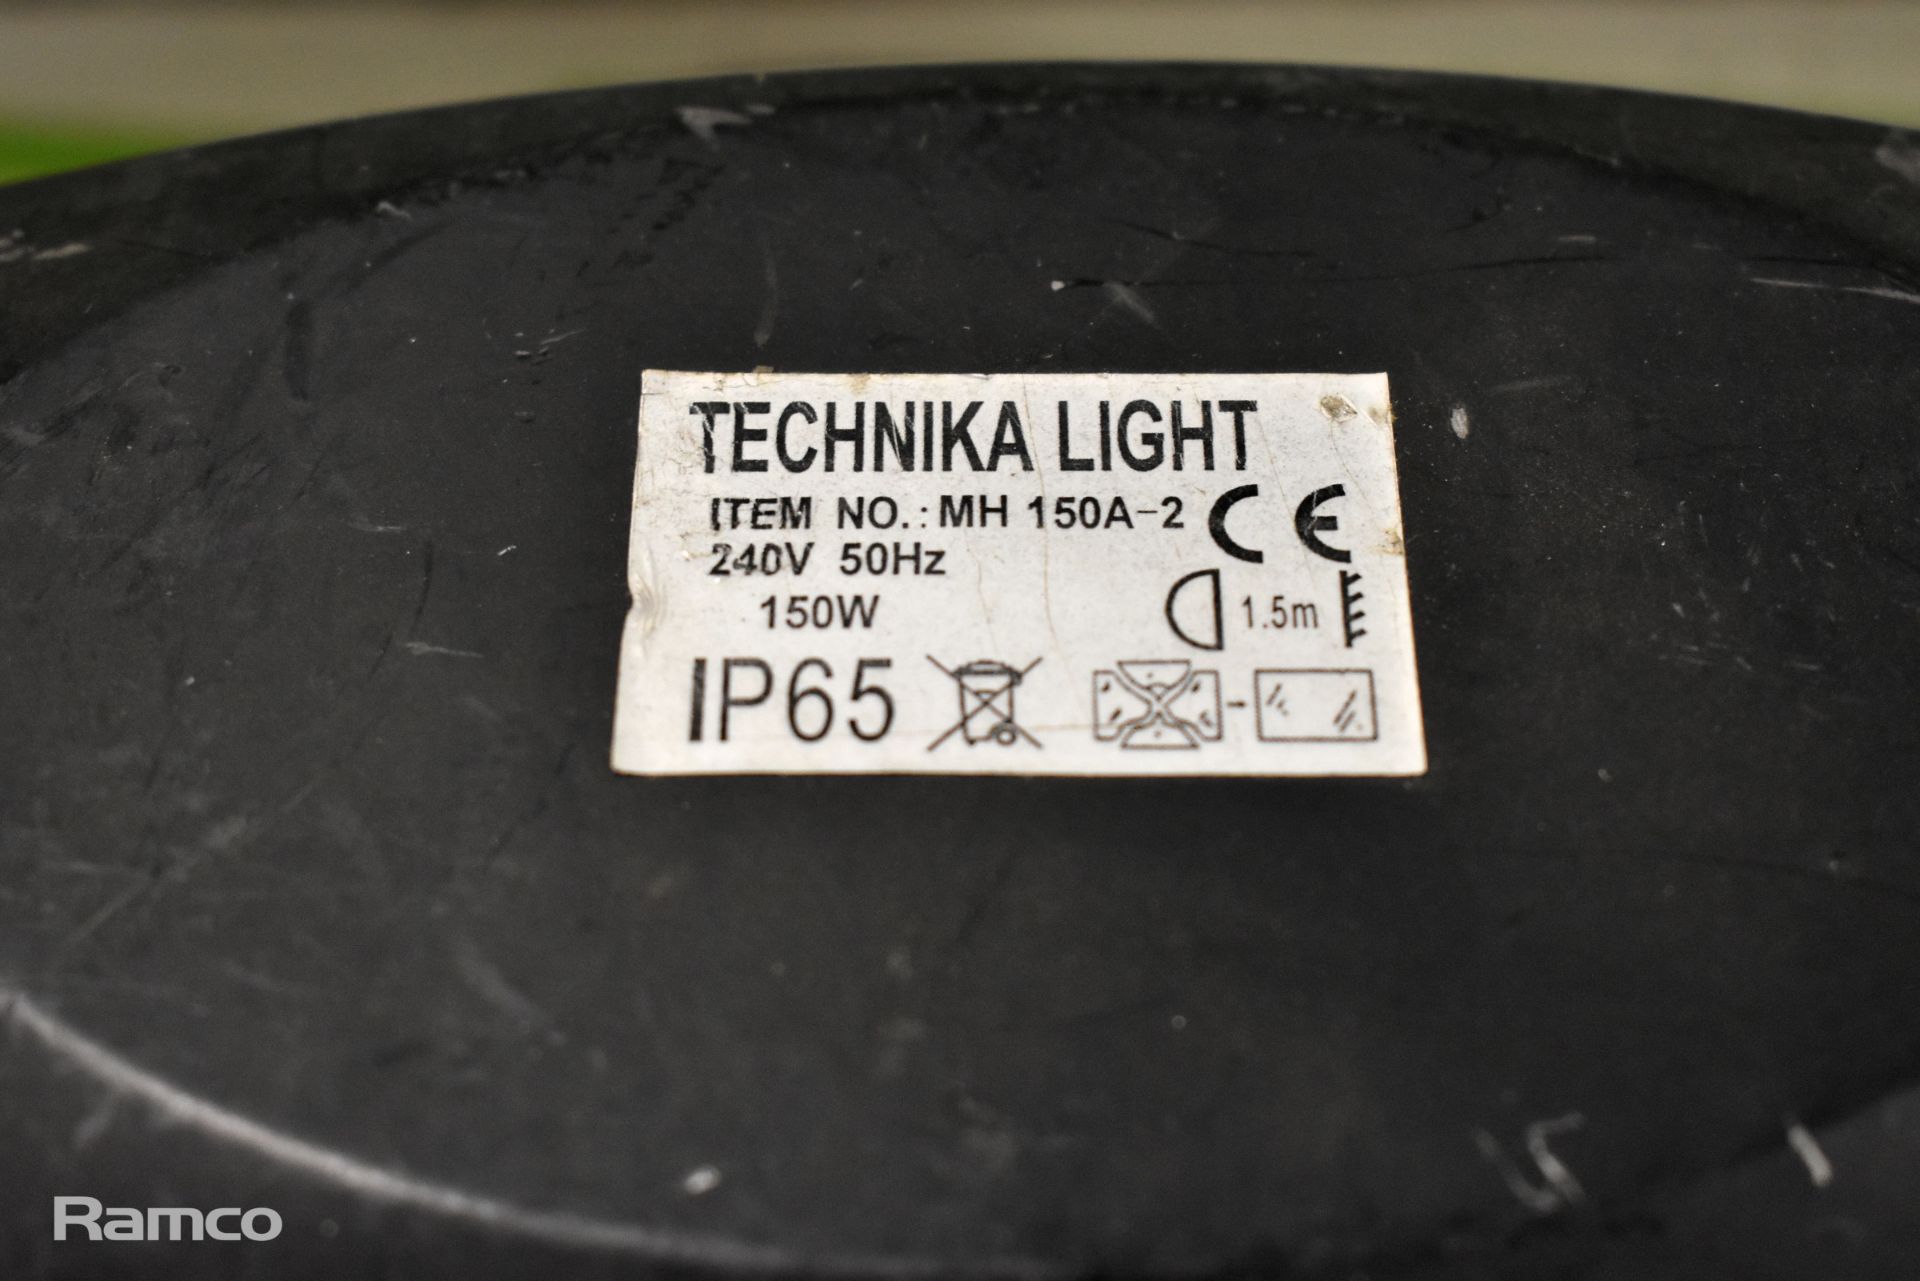 8x Technika MH150A Red Arrow 150W metal halide flood lights with clamp - 16A plug - white lamp - Image 7 of 8